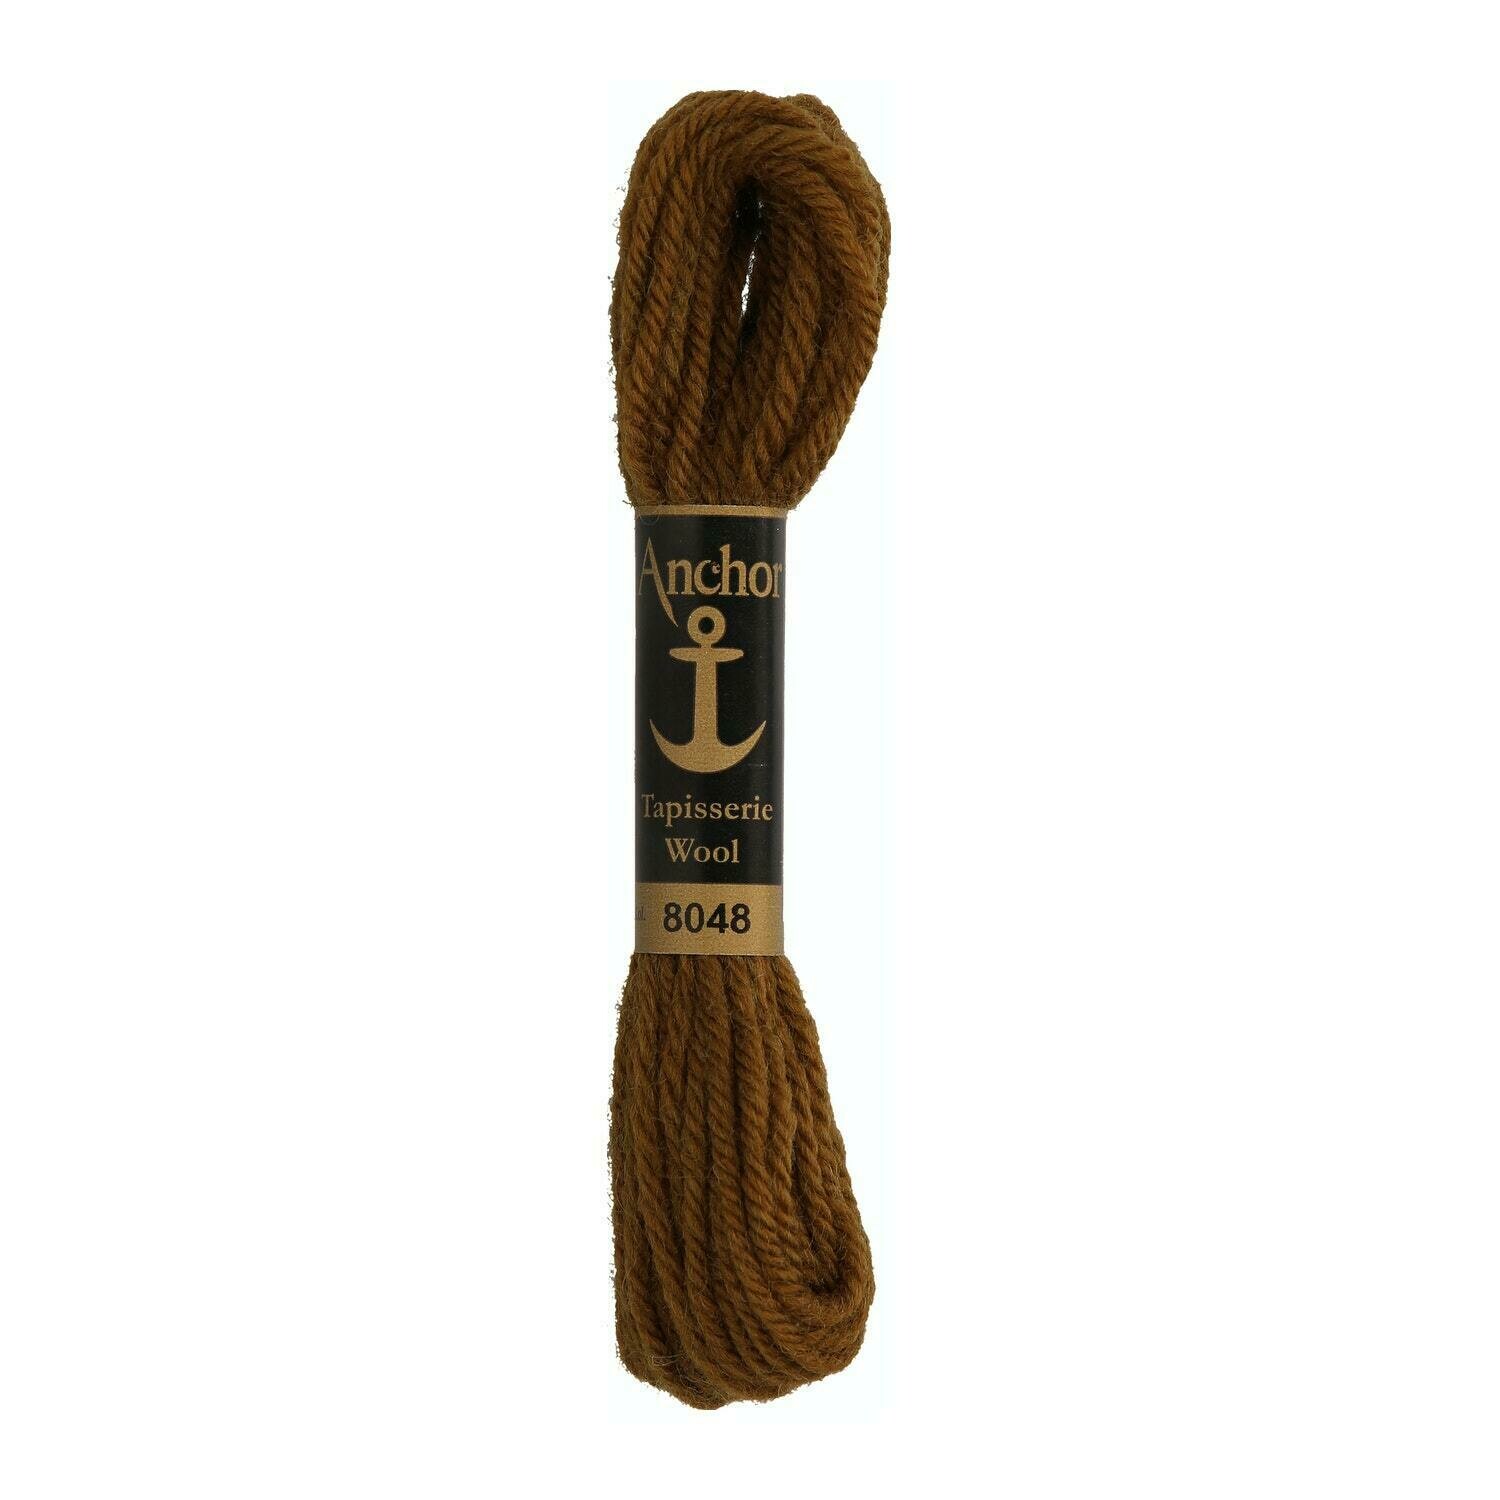 Anchor Tapisserie Wool #08048